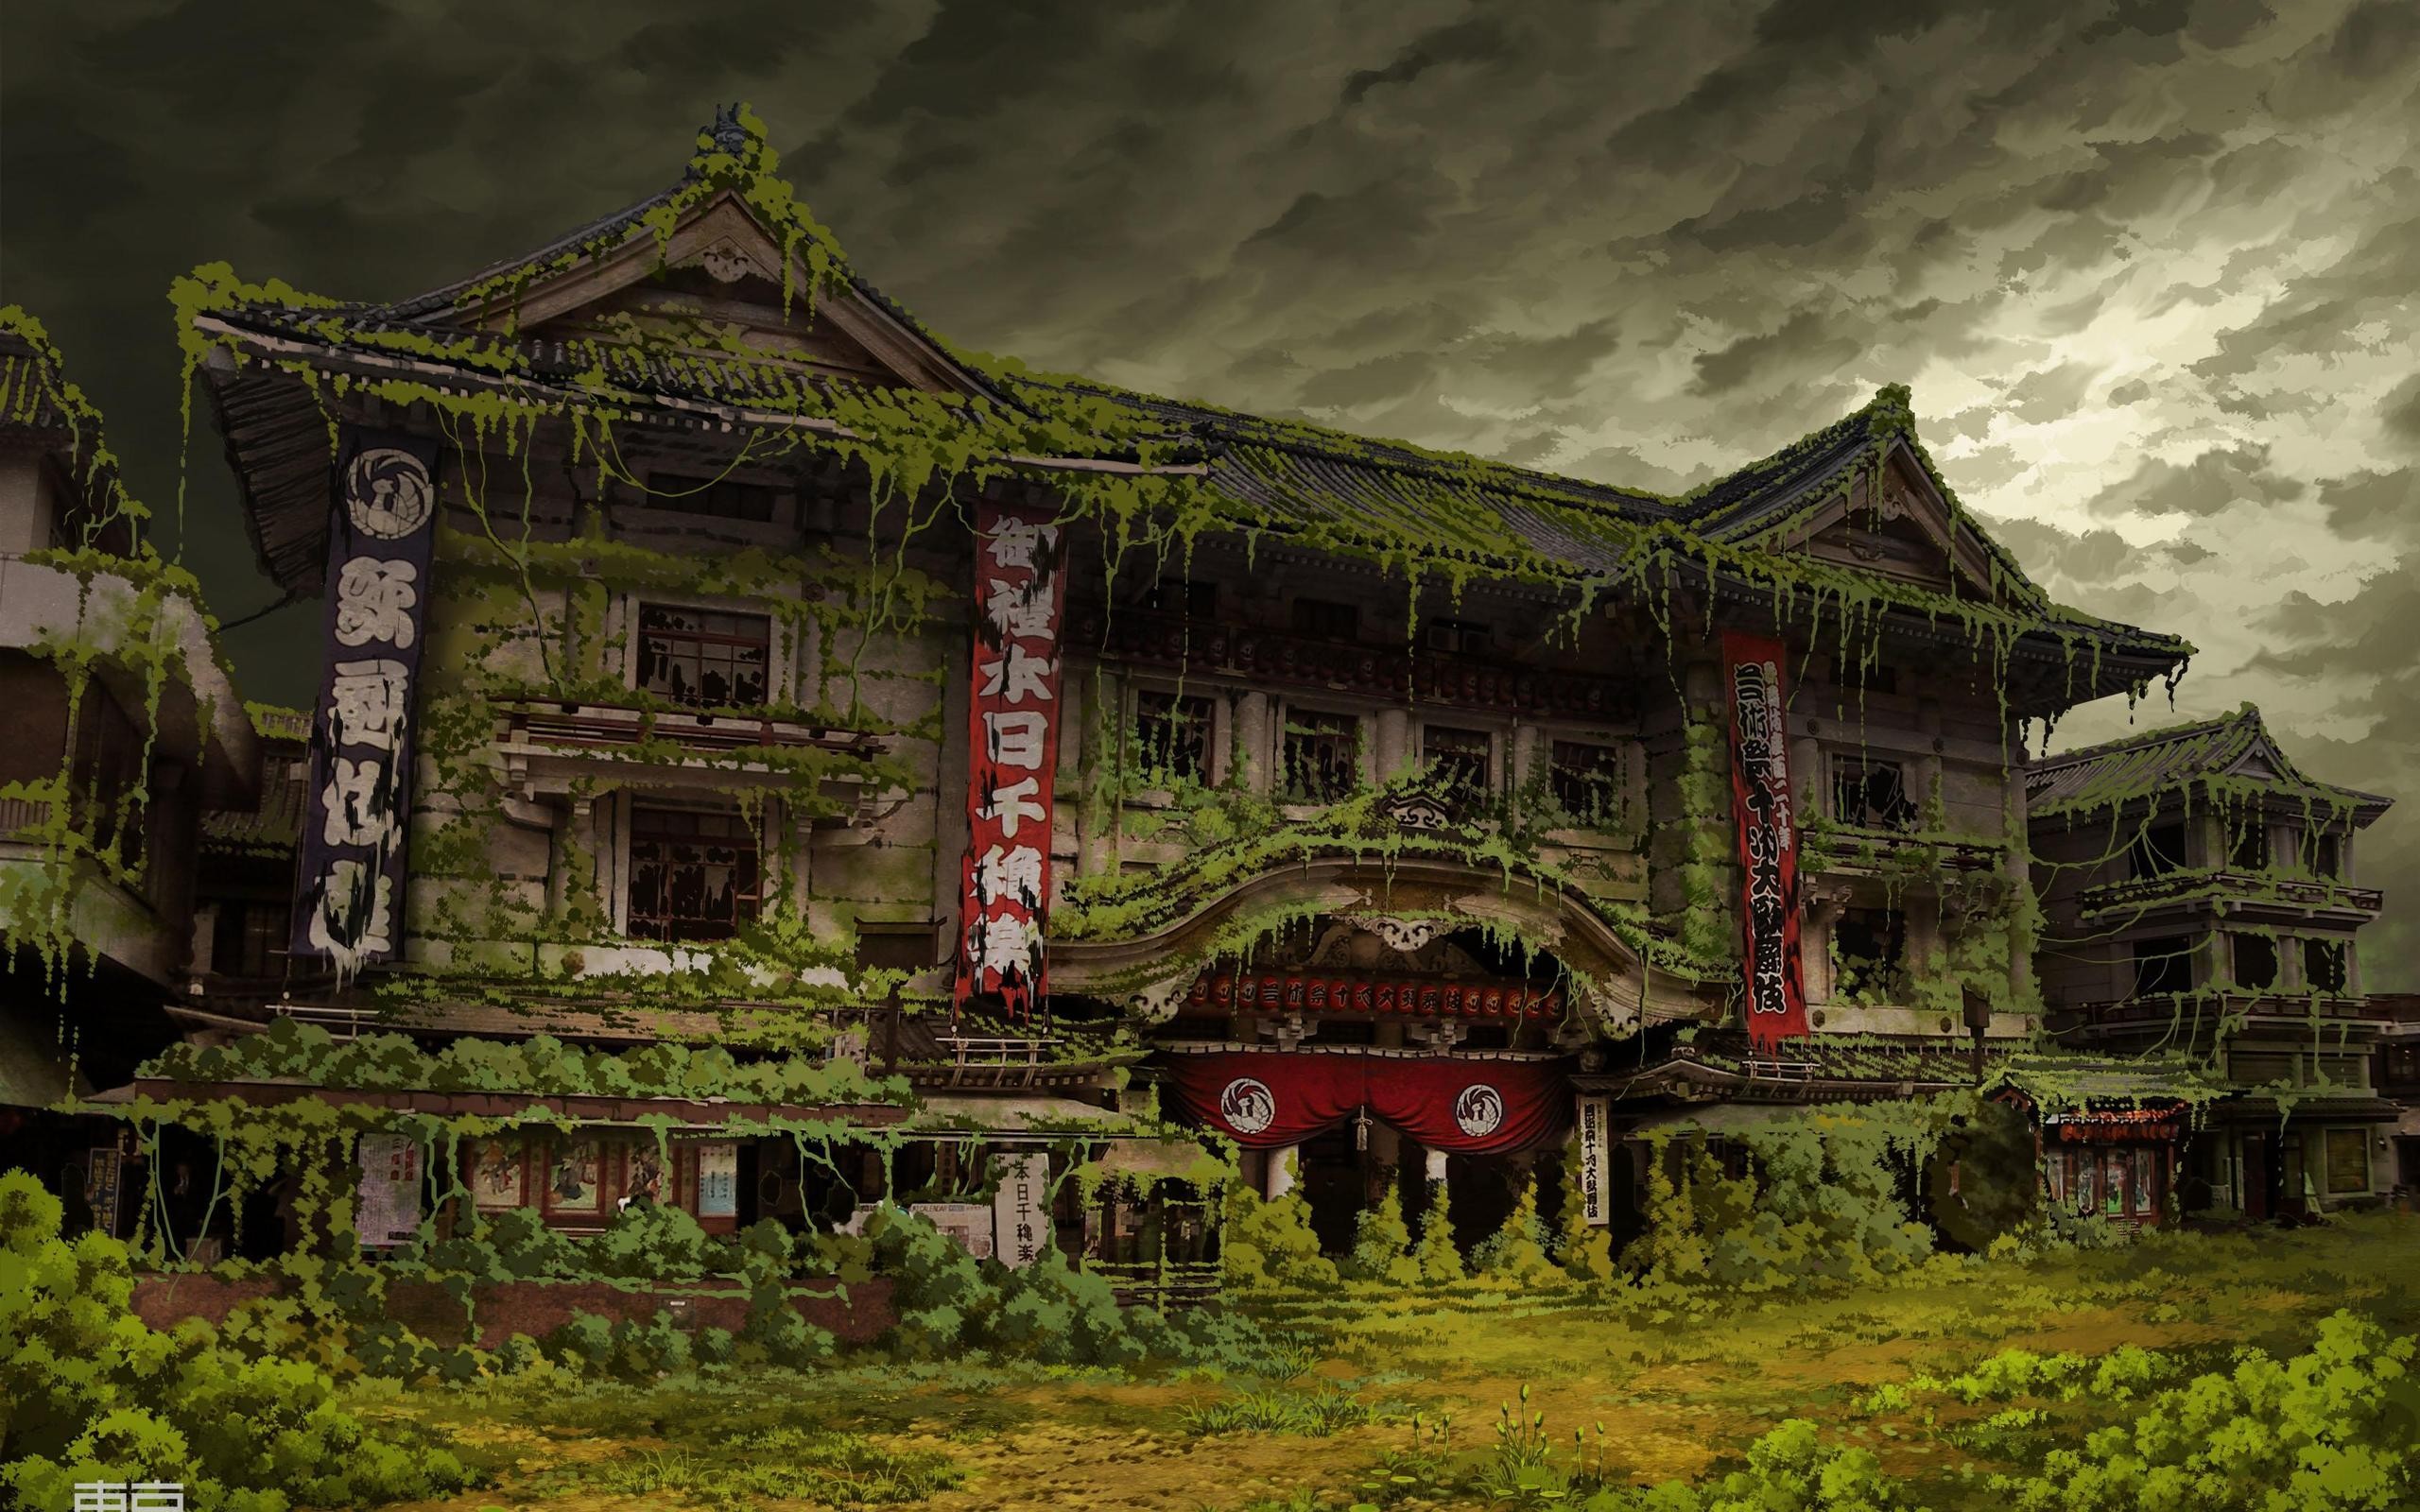 tokyo, Ruins, Architecture, Overcast, Asian, Architecture, Ivy, Theatre, Abandoned, Banners, Tokyogenso Wallpaper